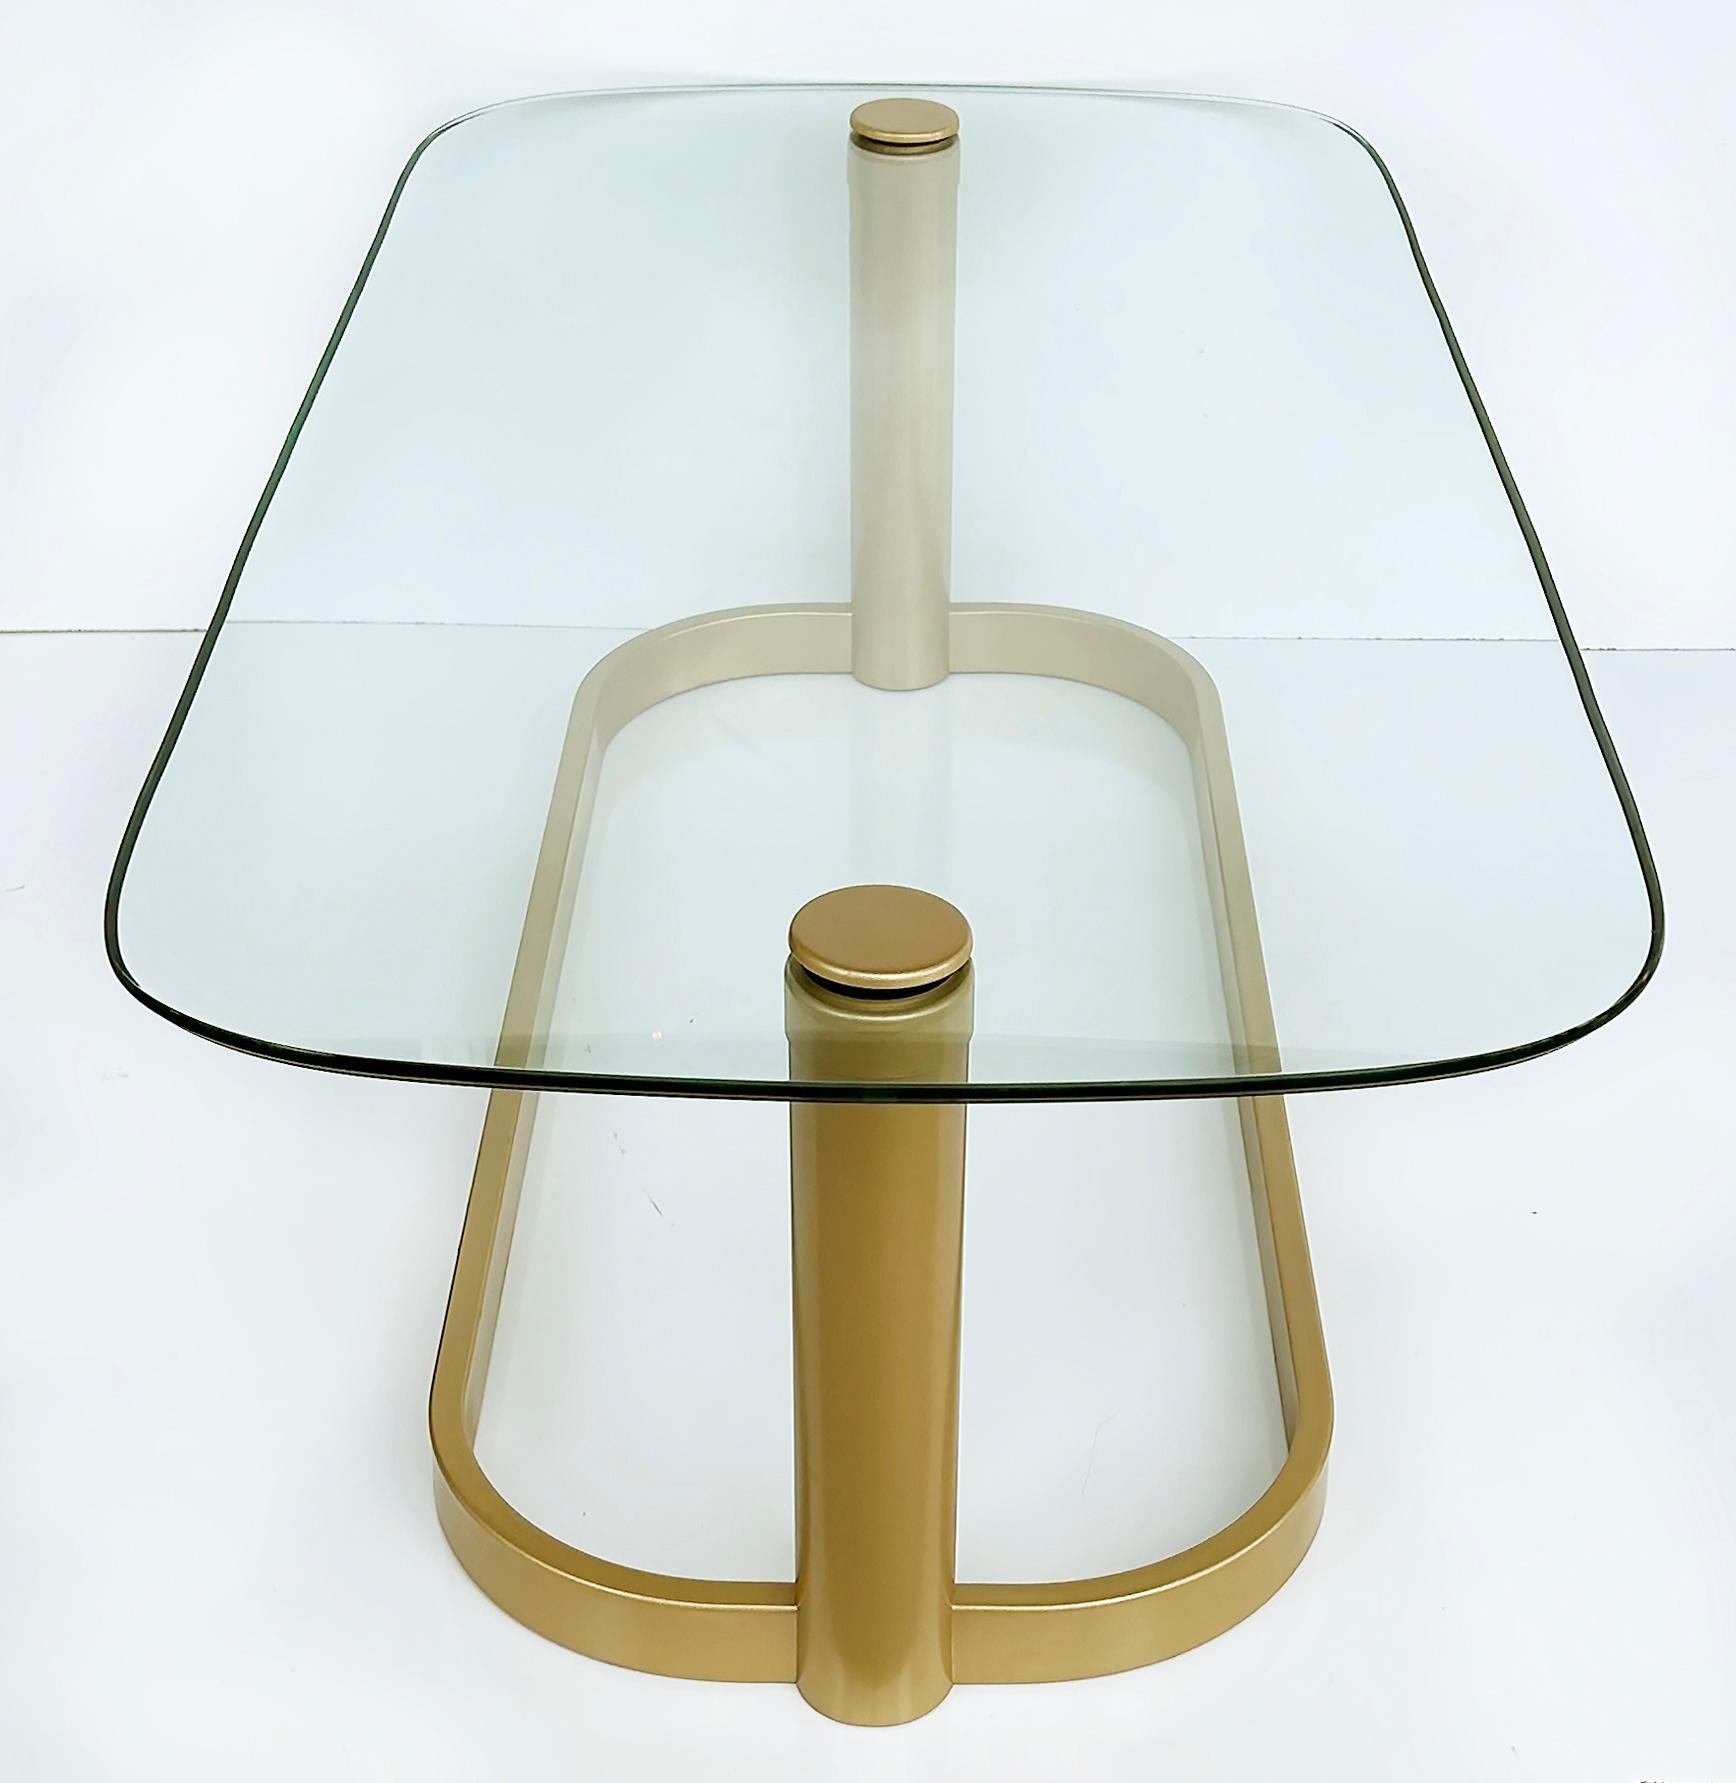 Vintage Modern Glass Top Coffee Table, Rounded Edges, Metal Base In Good Condition For Sale In Miami, FL